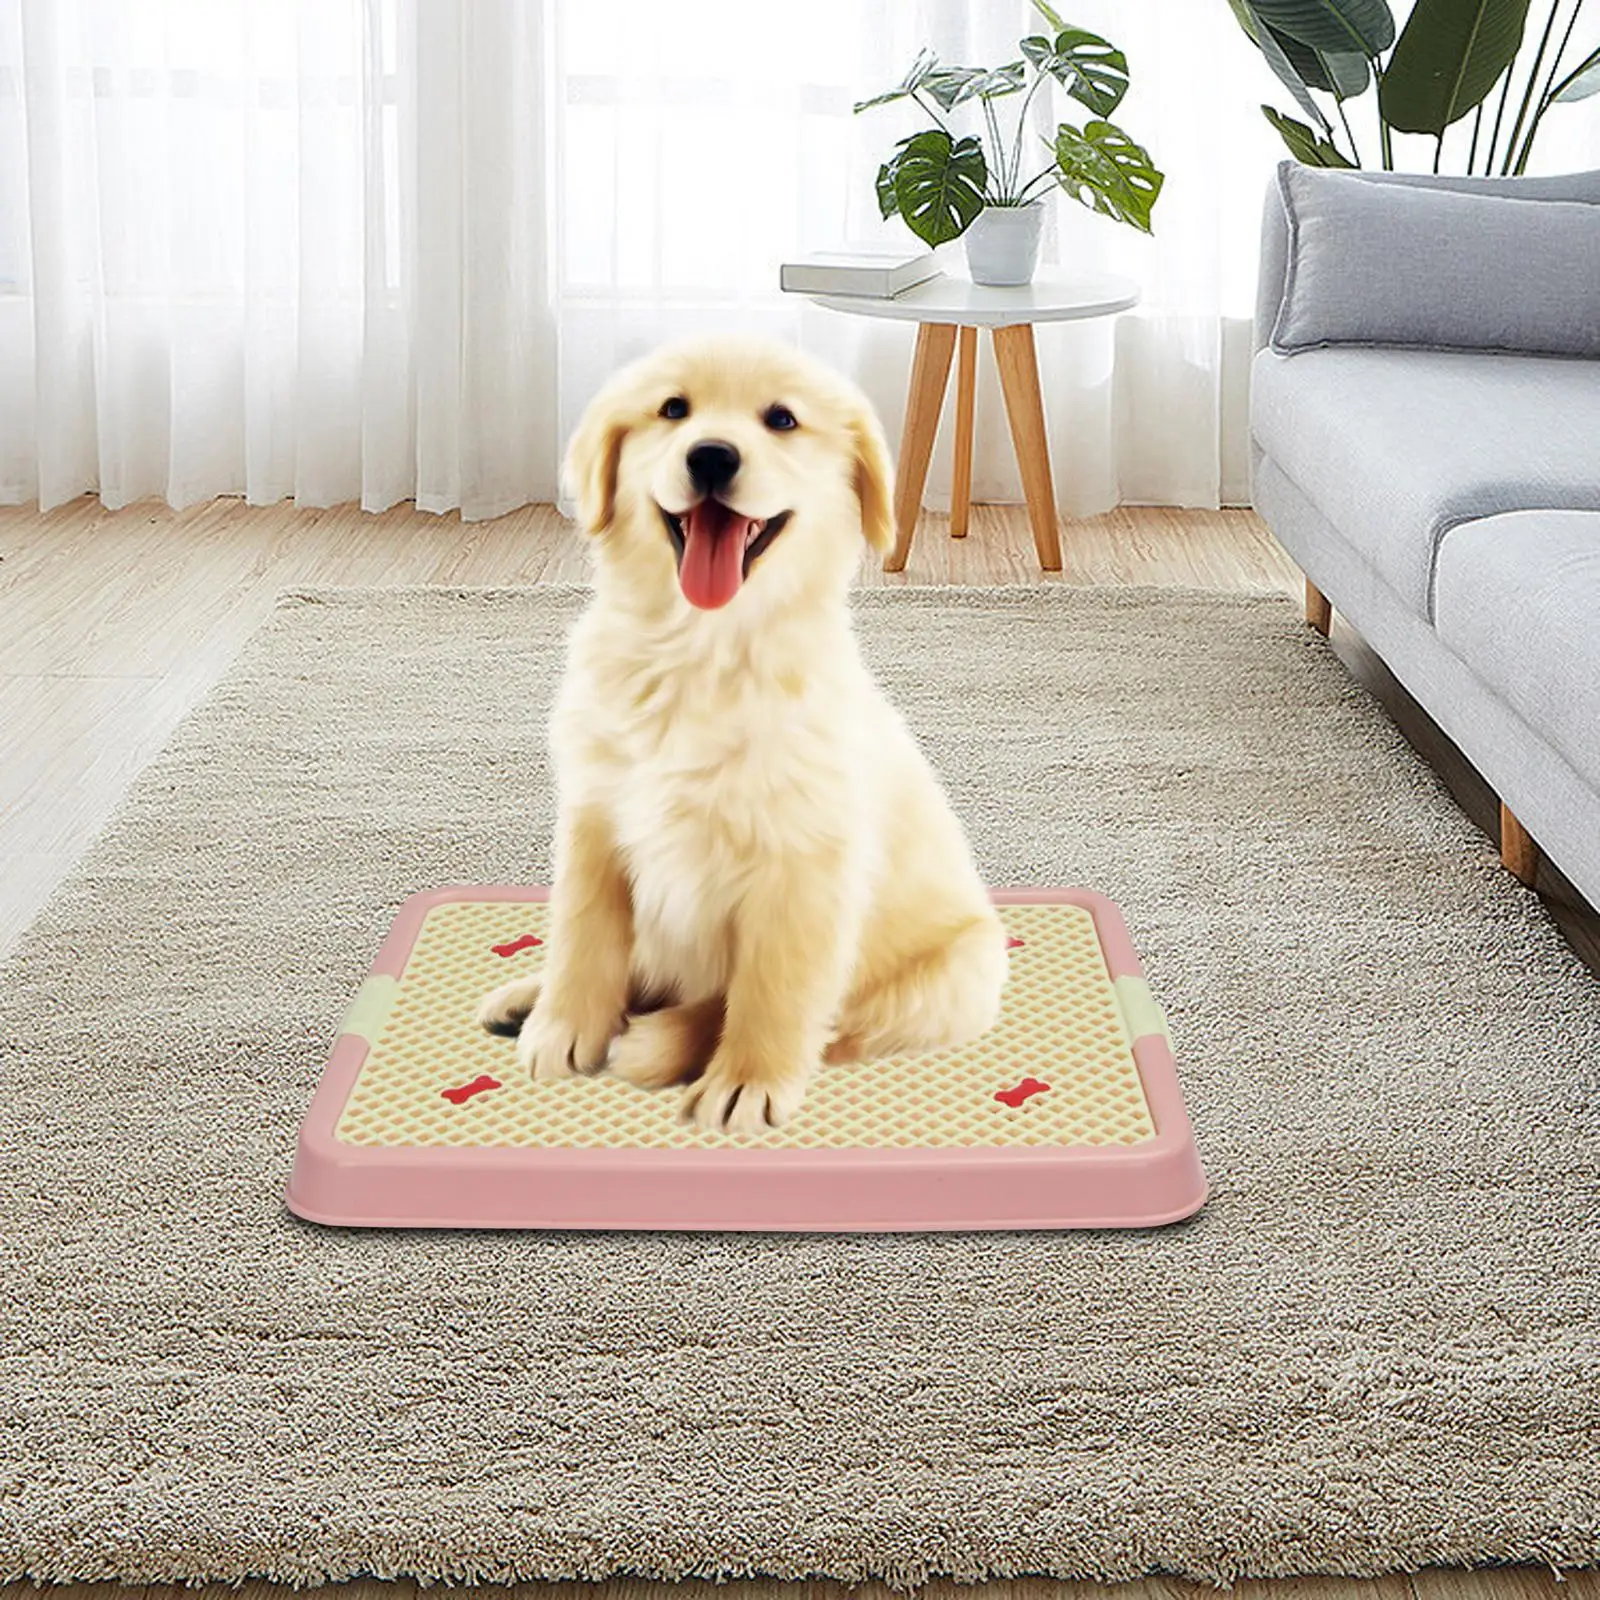 Dog Training Toilet Dog Potty Tray Cleaning Tool Removable Anti Splashing Trainer Corner for Kitten Dogs Cats Puppy Balcony Home